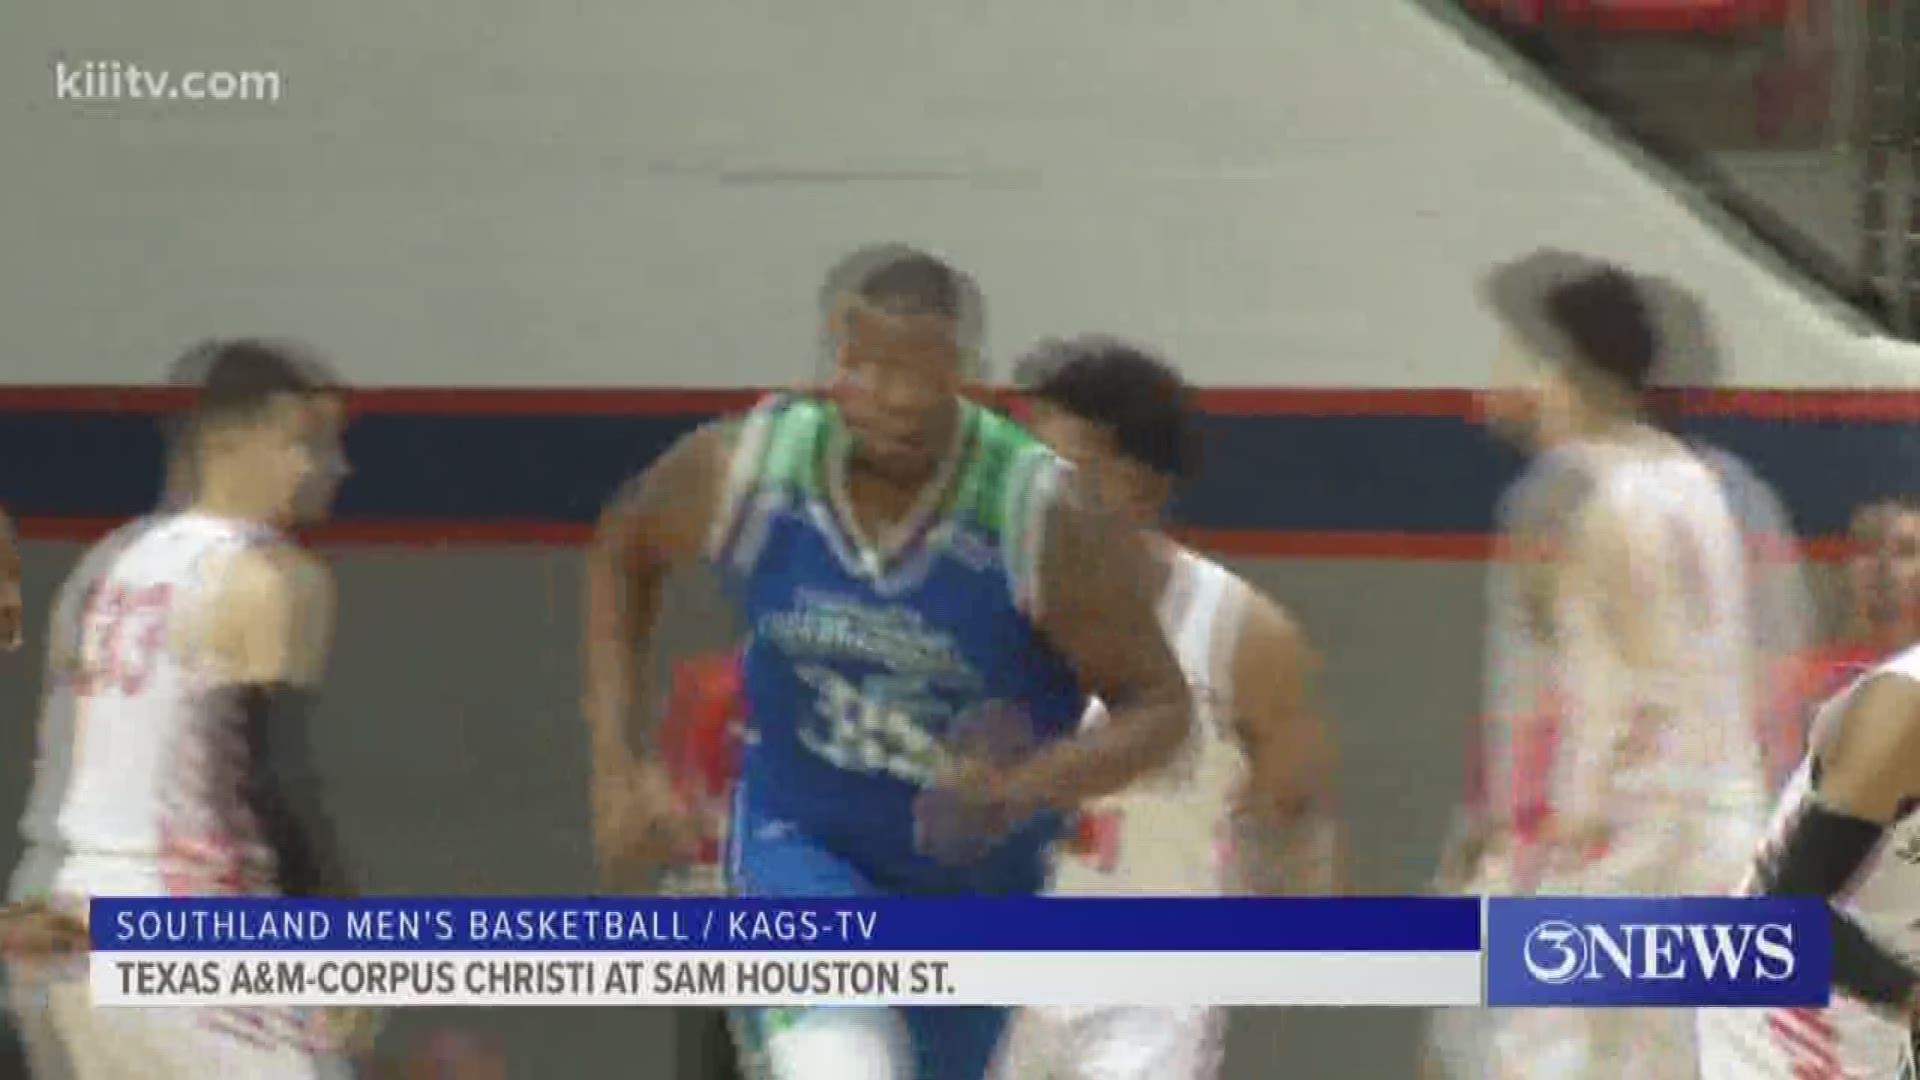 A&M-CC got as close as five points near the end of the first half before Sam Houston pulled away for the 80-61 win.